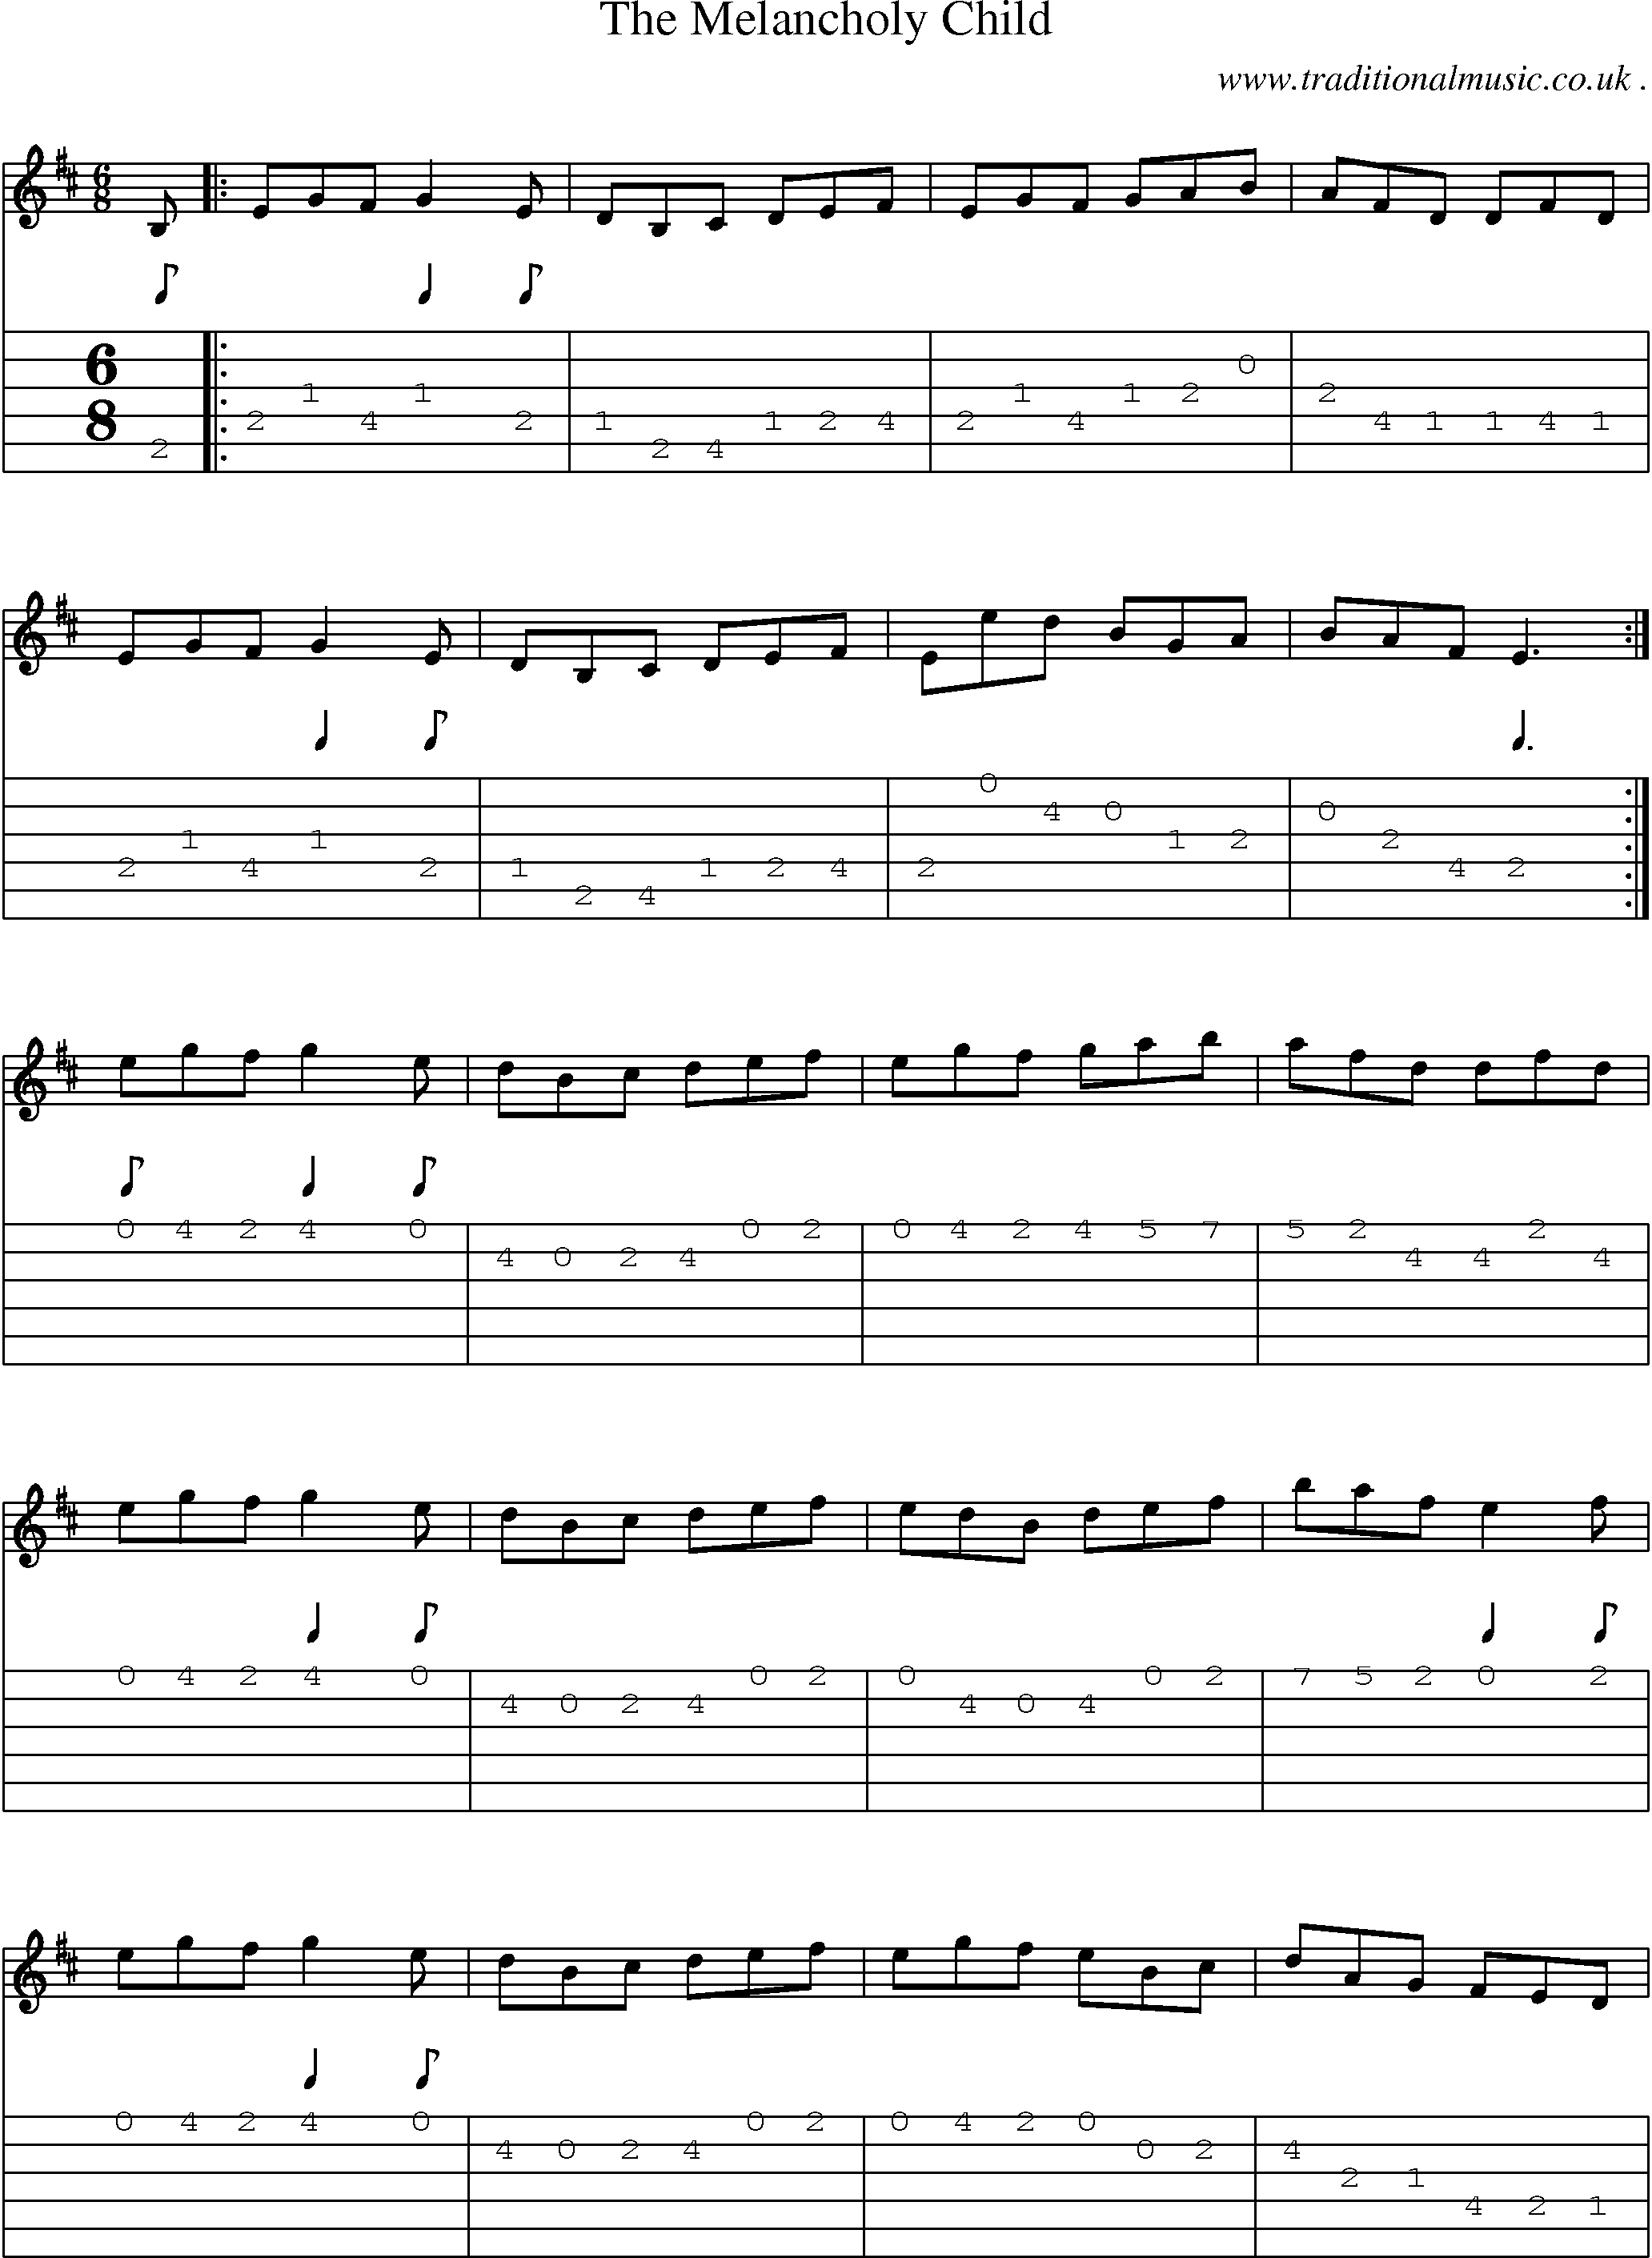 Sheet-Music and Guitar Tabs for The Melancholy Child